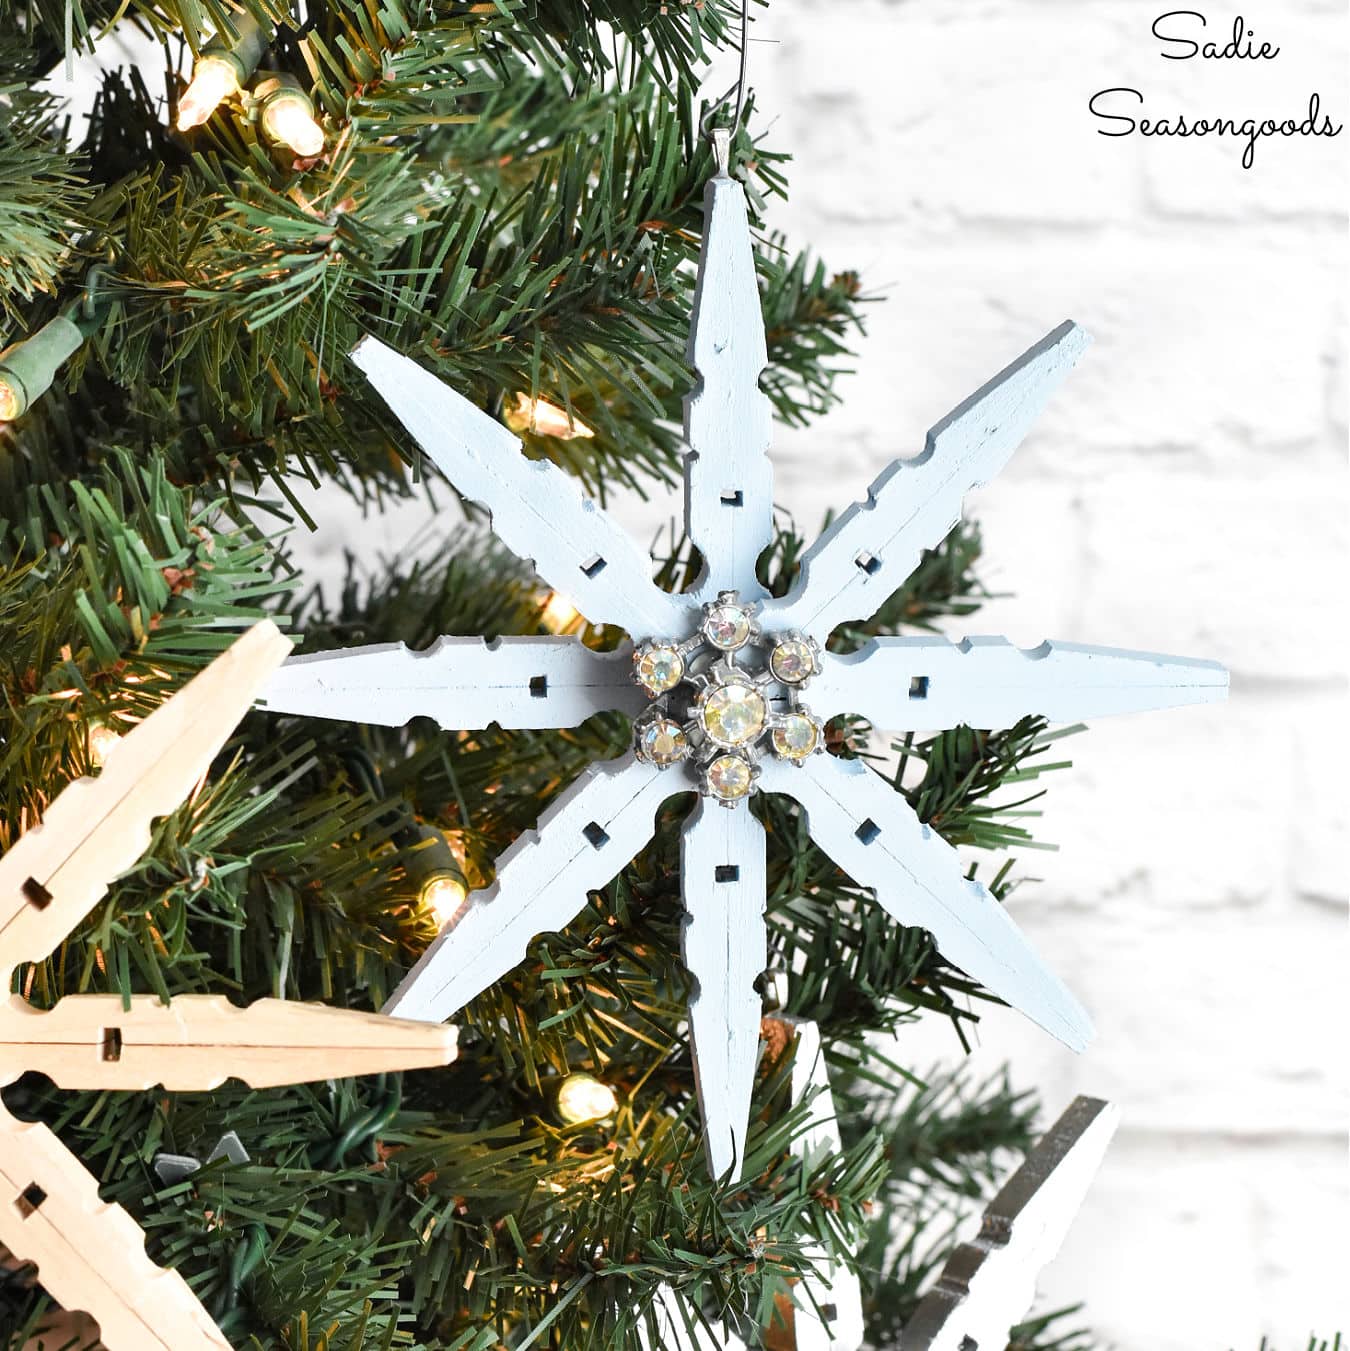 Make Wooden Snowflakes - Easy Cheap and Make Great Ornaments 